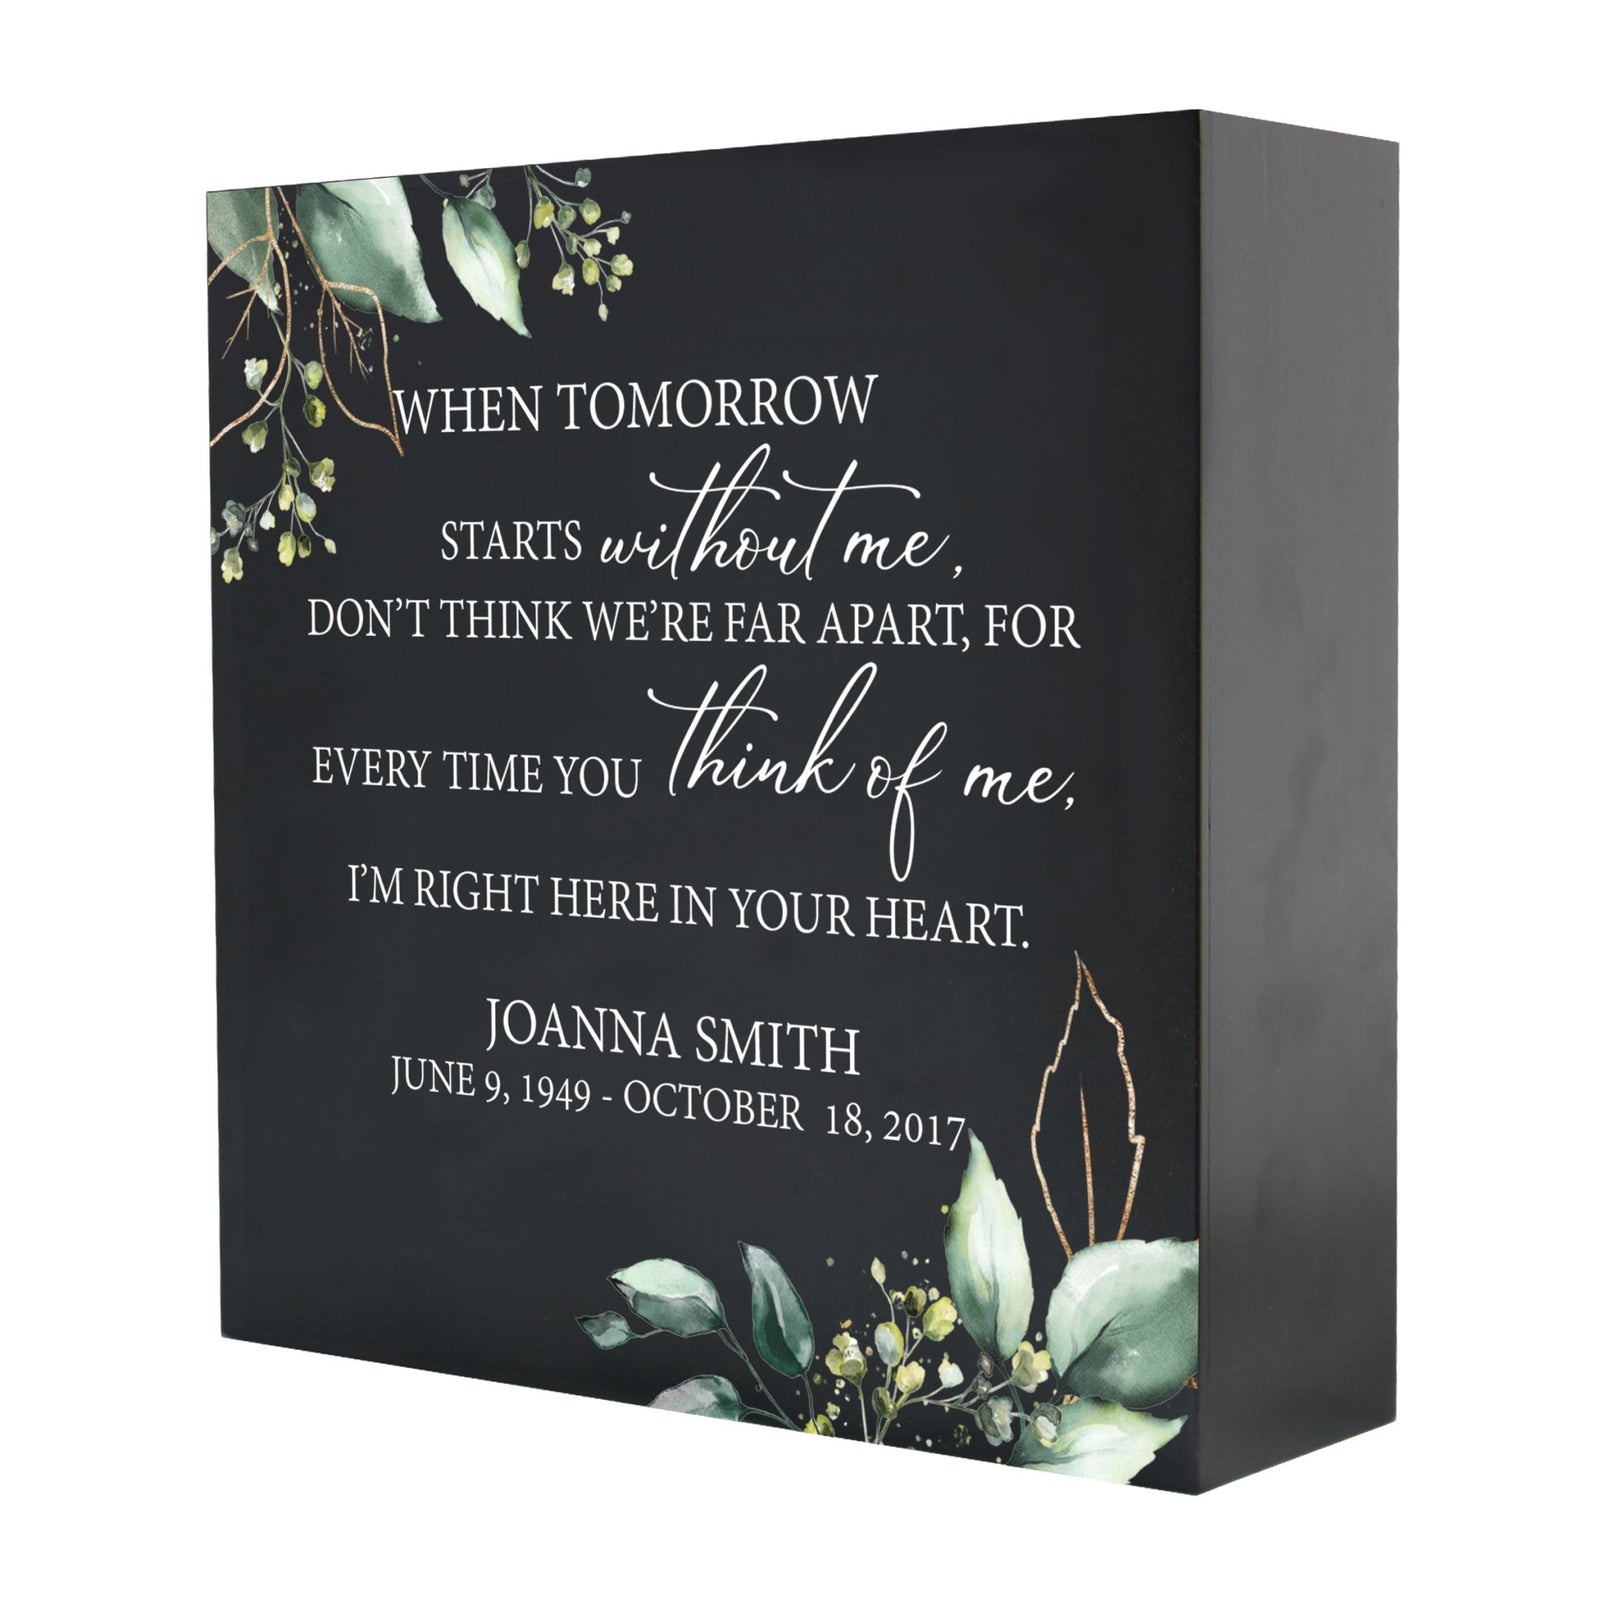 Personalized Wooden Memorial Shadow Box Urn for Human Ashes - When Tomorrow Starts - LifeSong Milestones